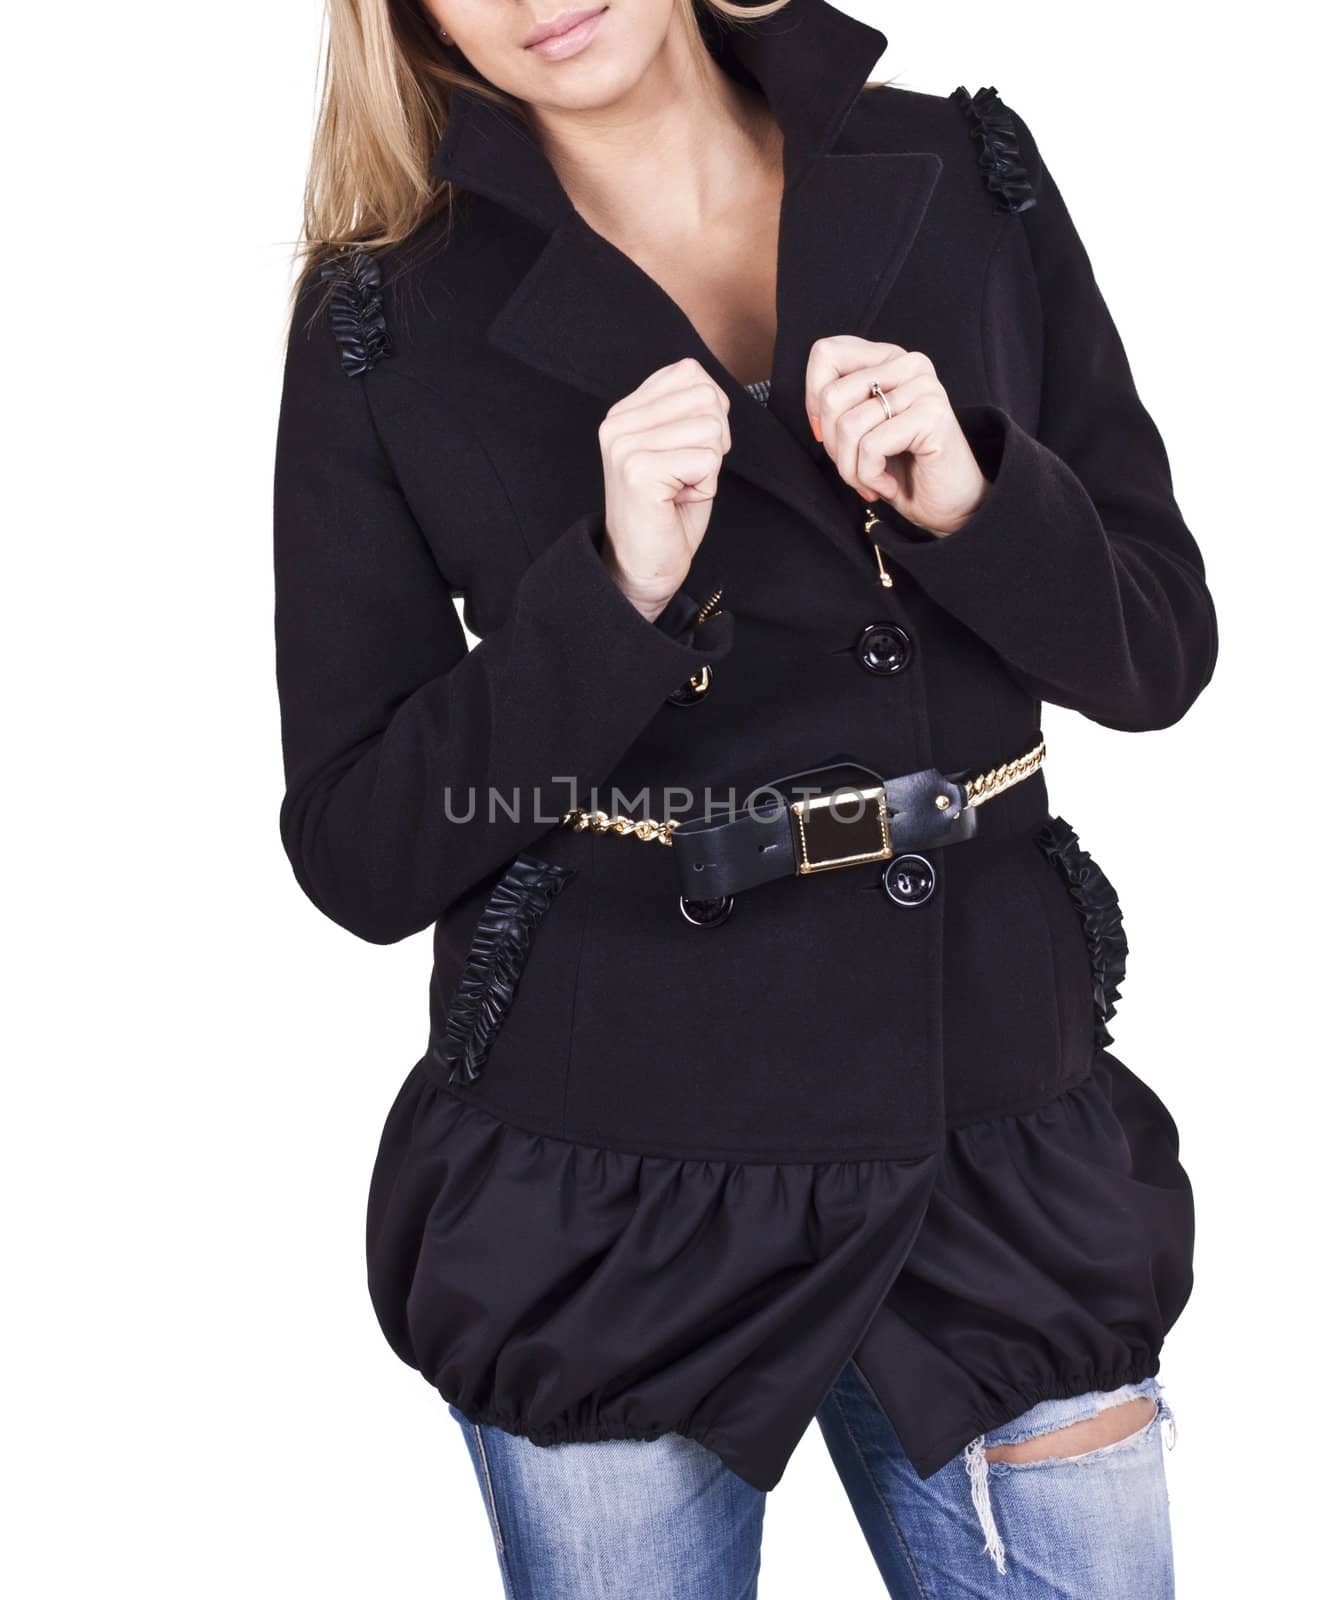 Young beautiful girl in a black jacket